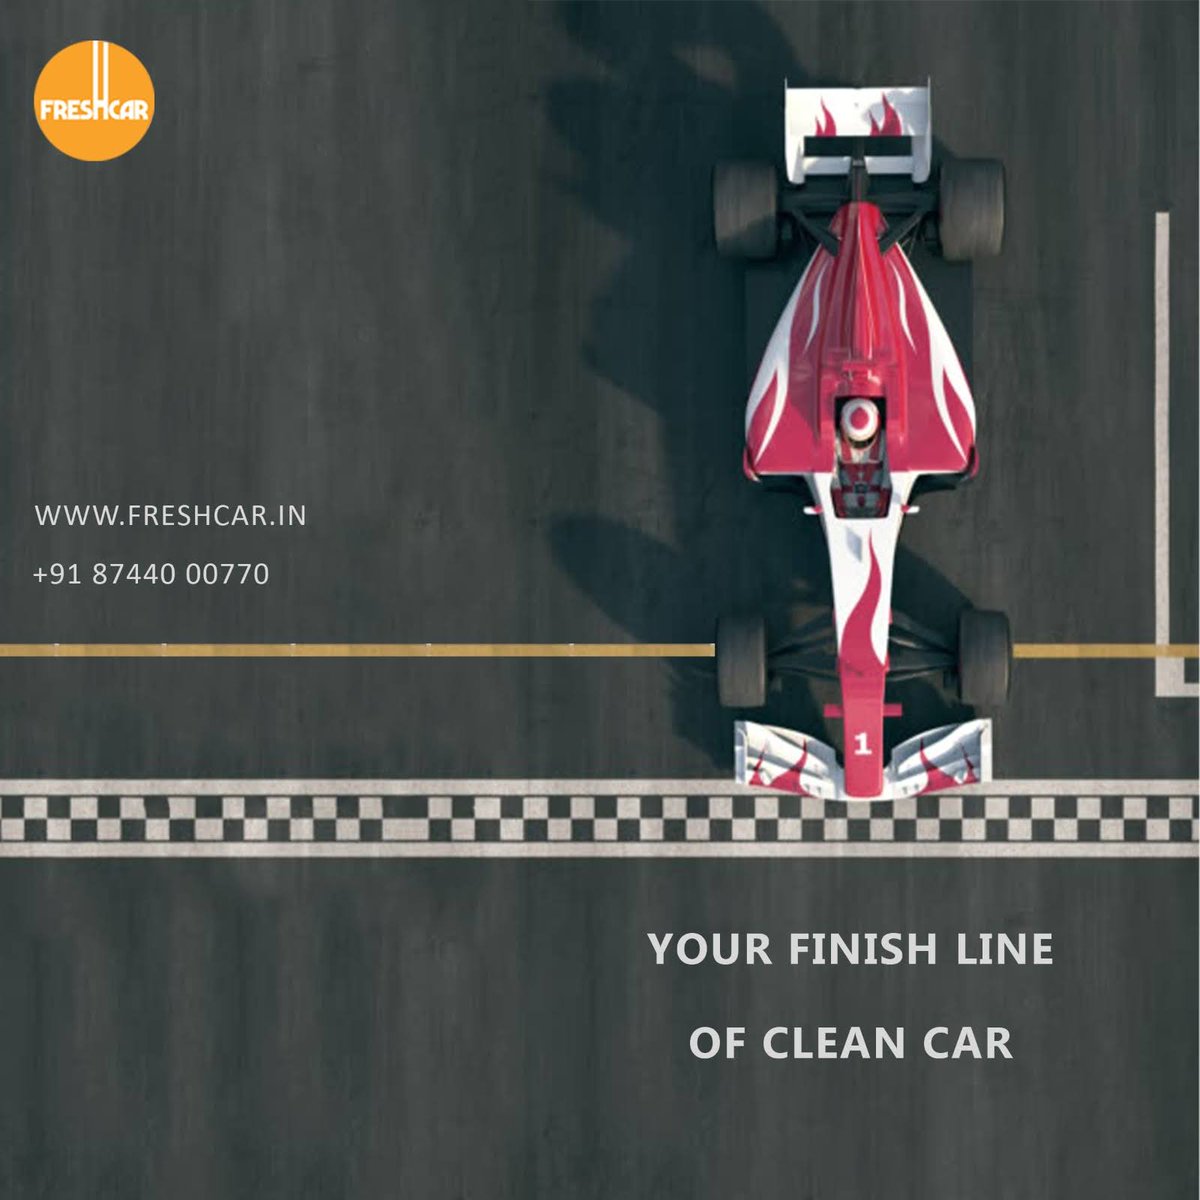 As SPEED and PERFORMANCE defines the winner on a race track. DAILY and REGULAR CAR CLEANING defines how better and longer your car performs well on the roads! 

Book a demo: freshcar.in 

#Freshcar #carcleaning #spotlessride #cleancar #urbanliving #carcare #Gurgaon